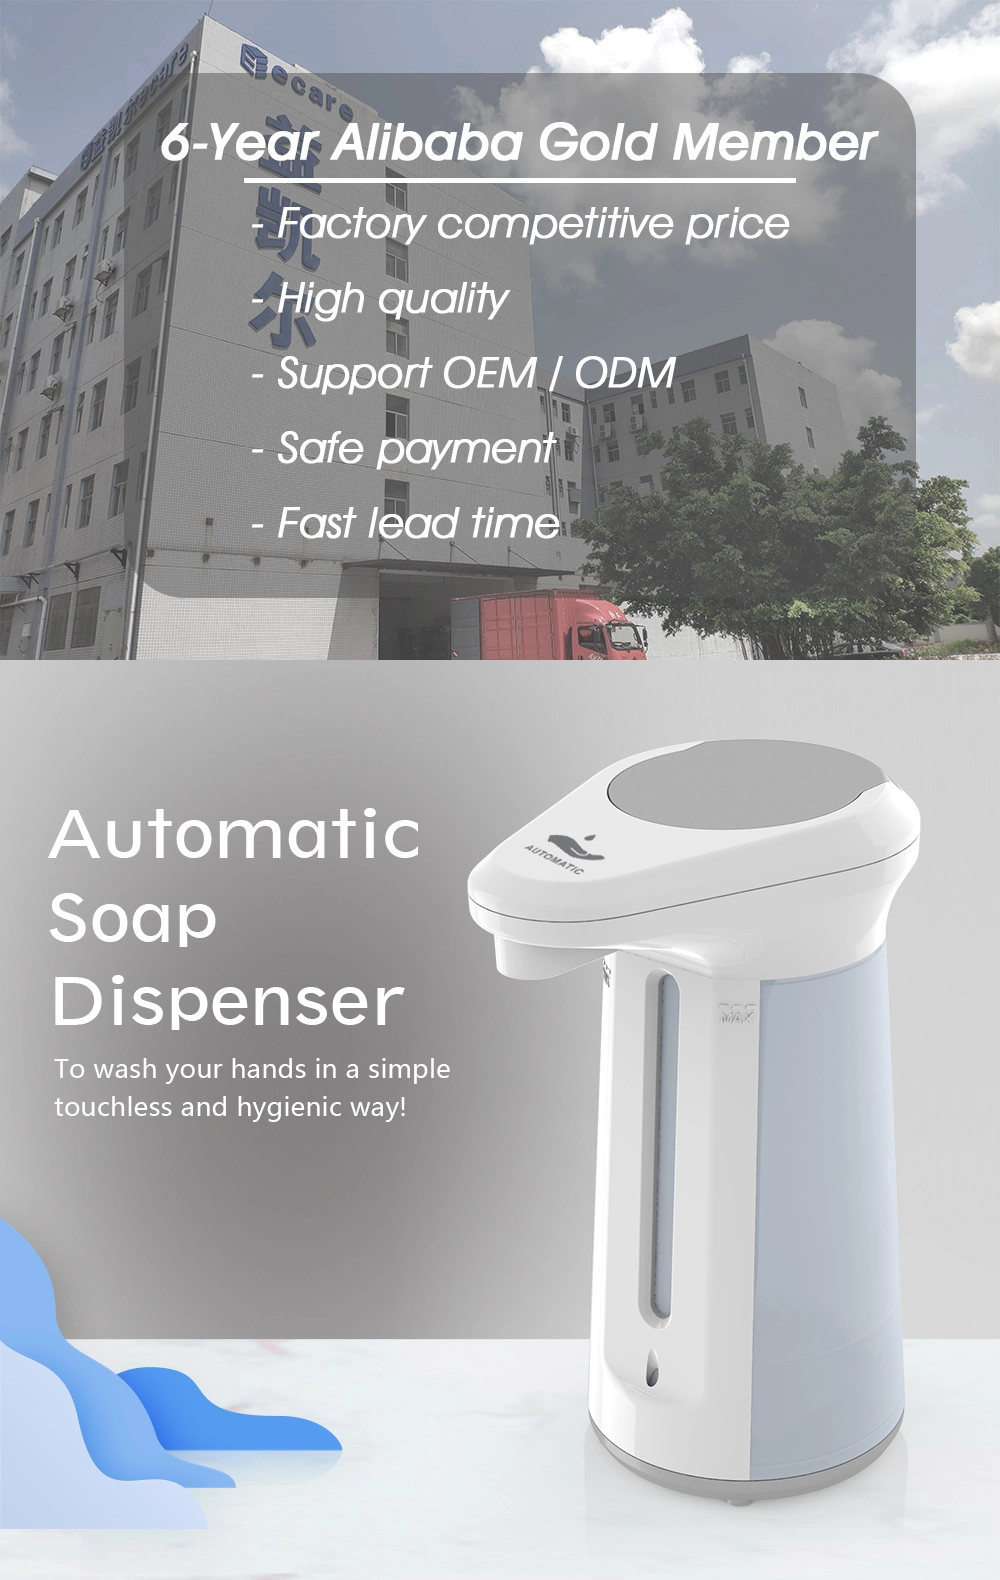 Liquid Wall and Water Display Elbow Electric Electronics Automatic Soap Dispenser Floor Dispenser